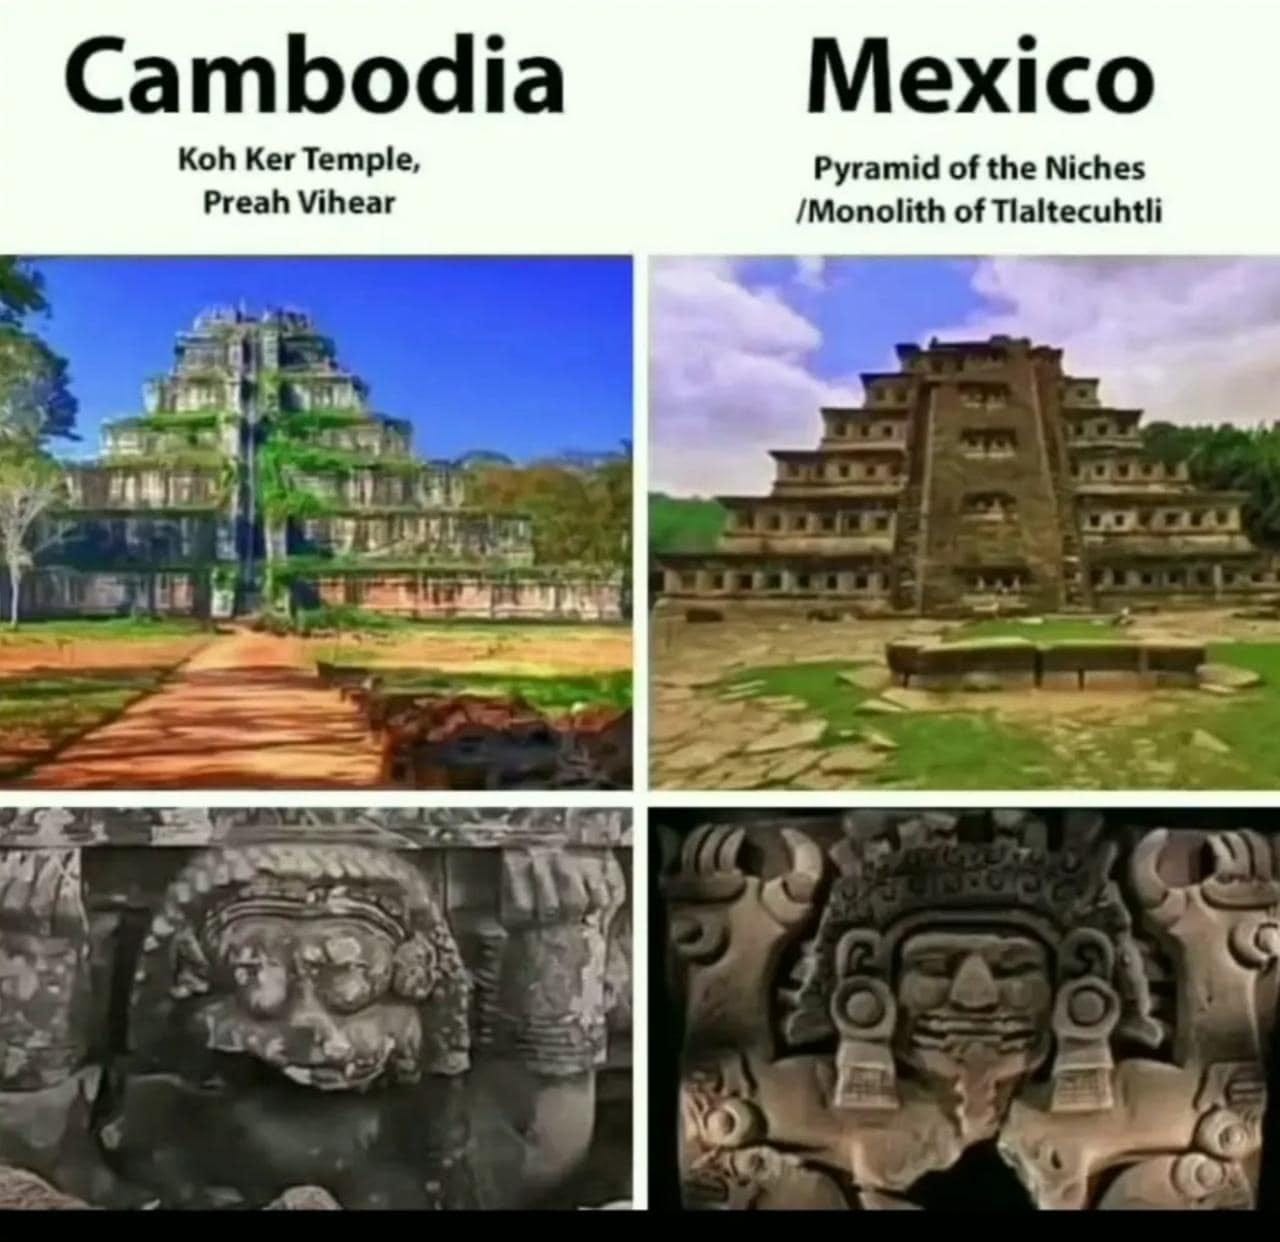 May be an image of text that says "Cambodia Koh Ker Temple, Preah Vihear Mexico Pyramid of the Niches /Monolith of Tlaltecuhtli"